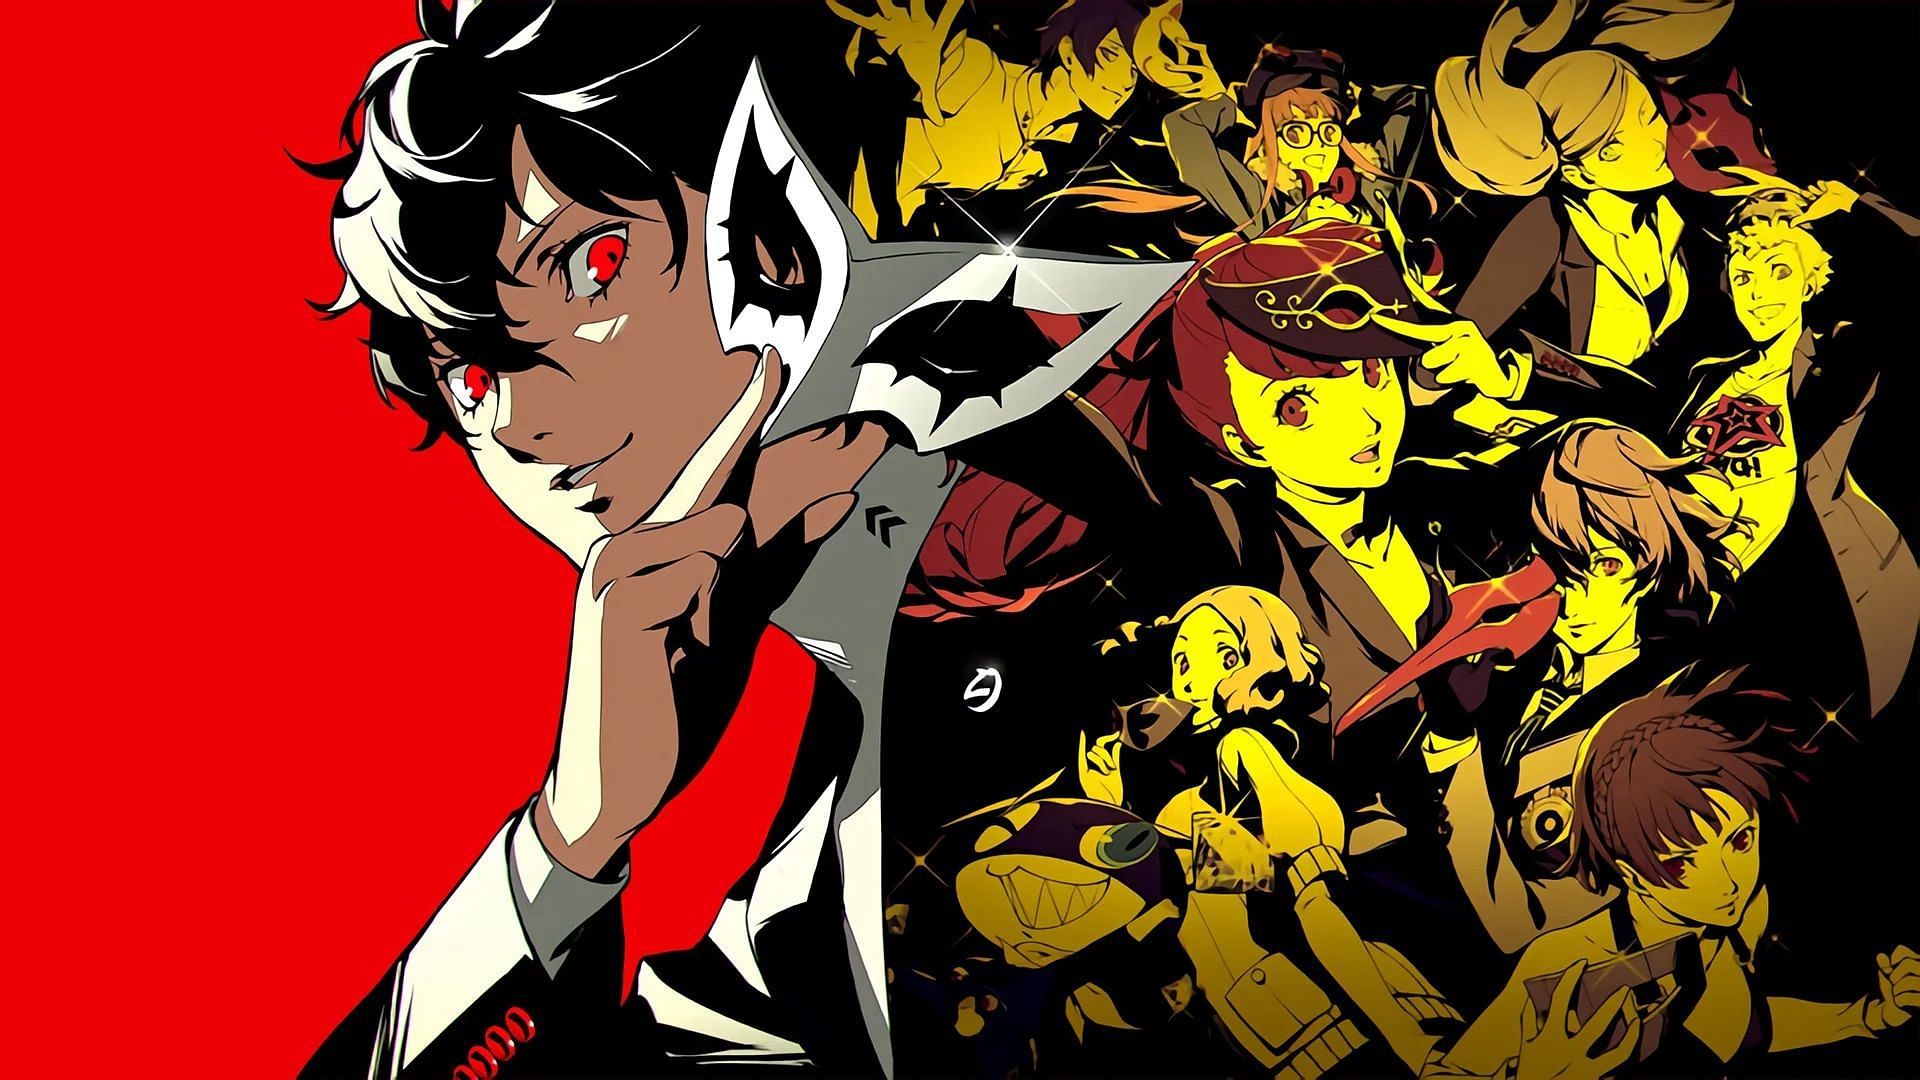 Persona 5 Royal Would Make a Great Anime